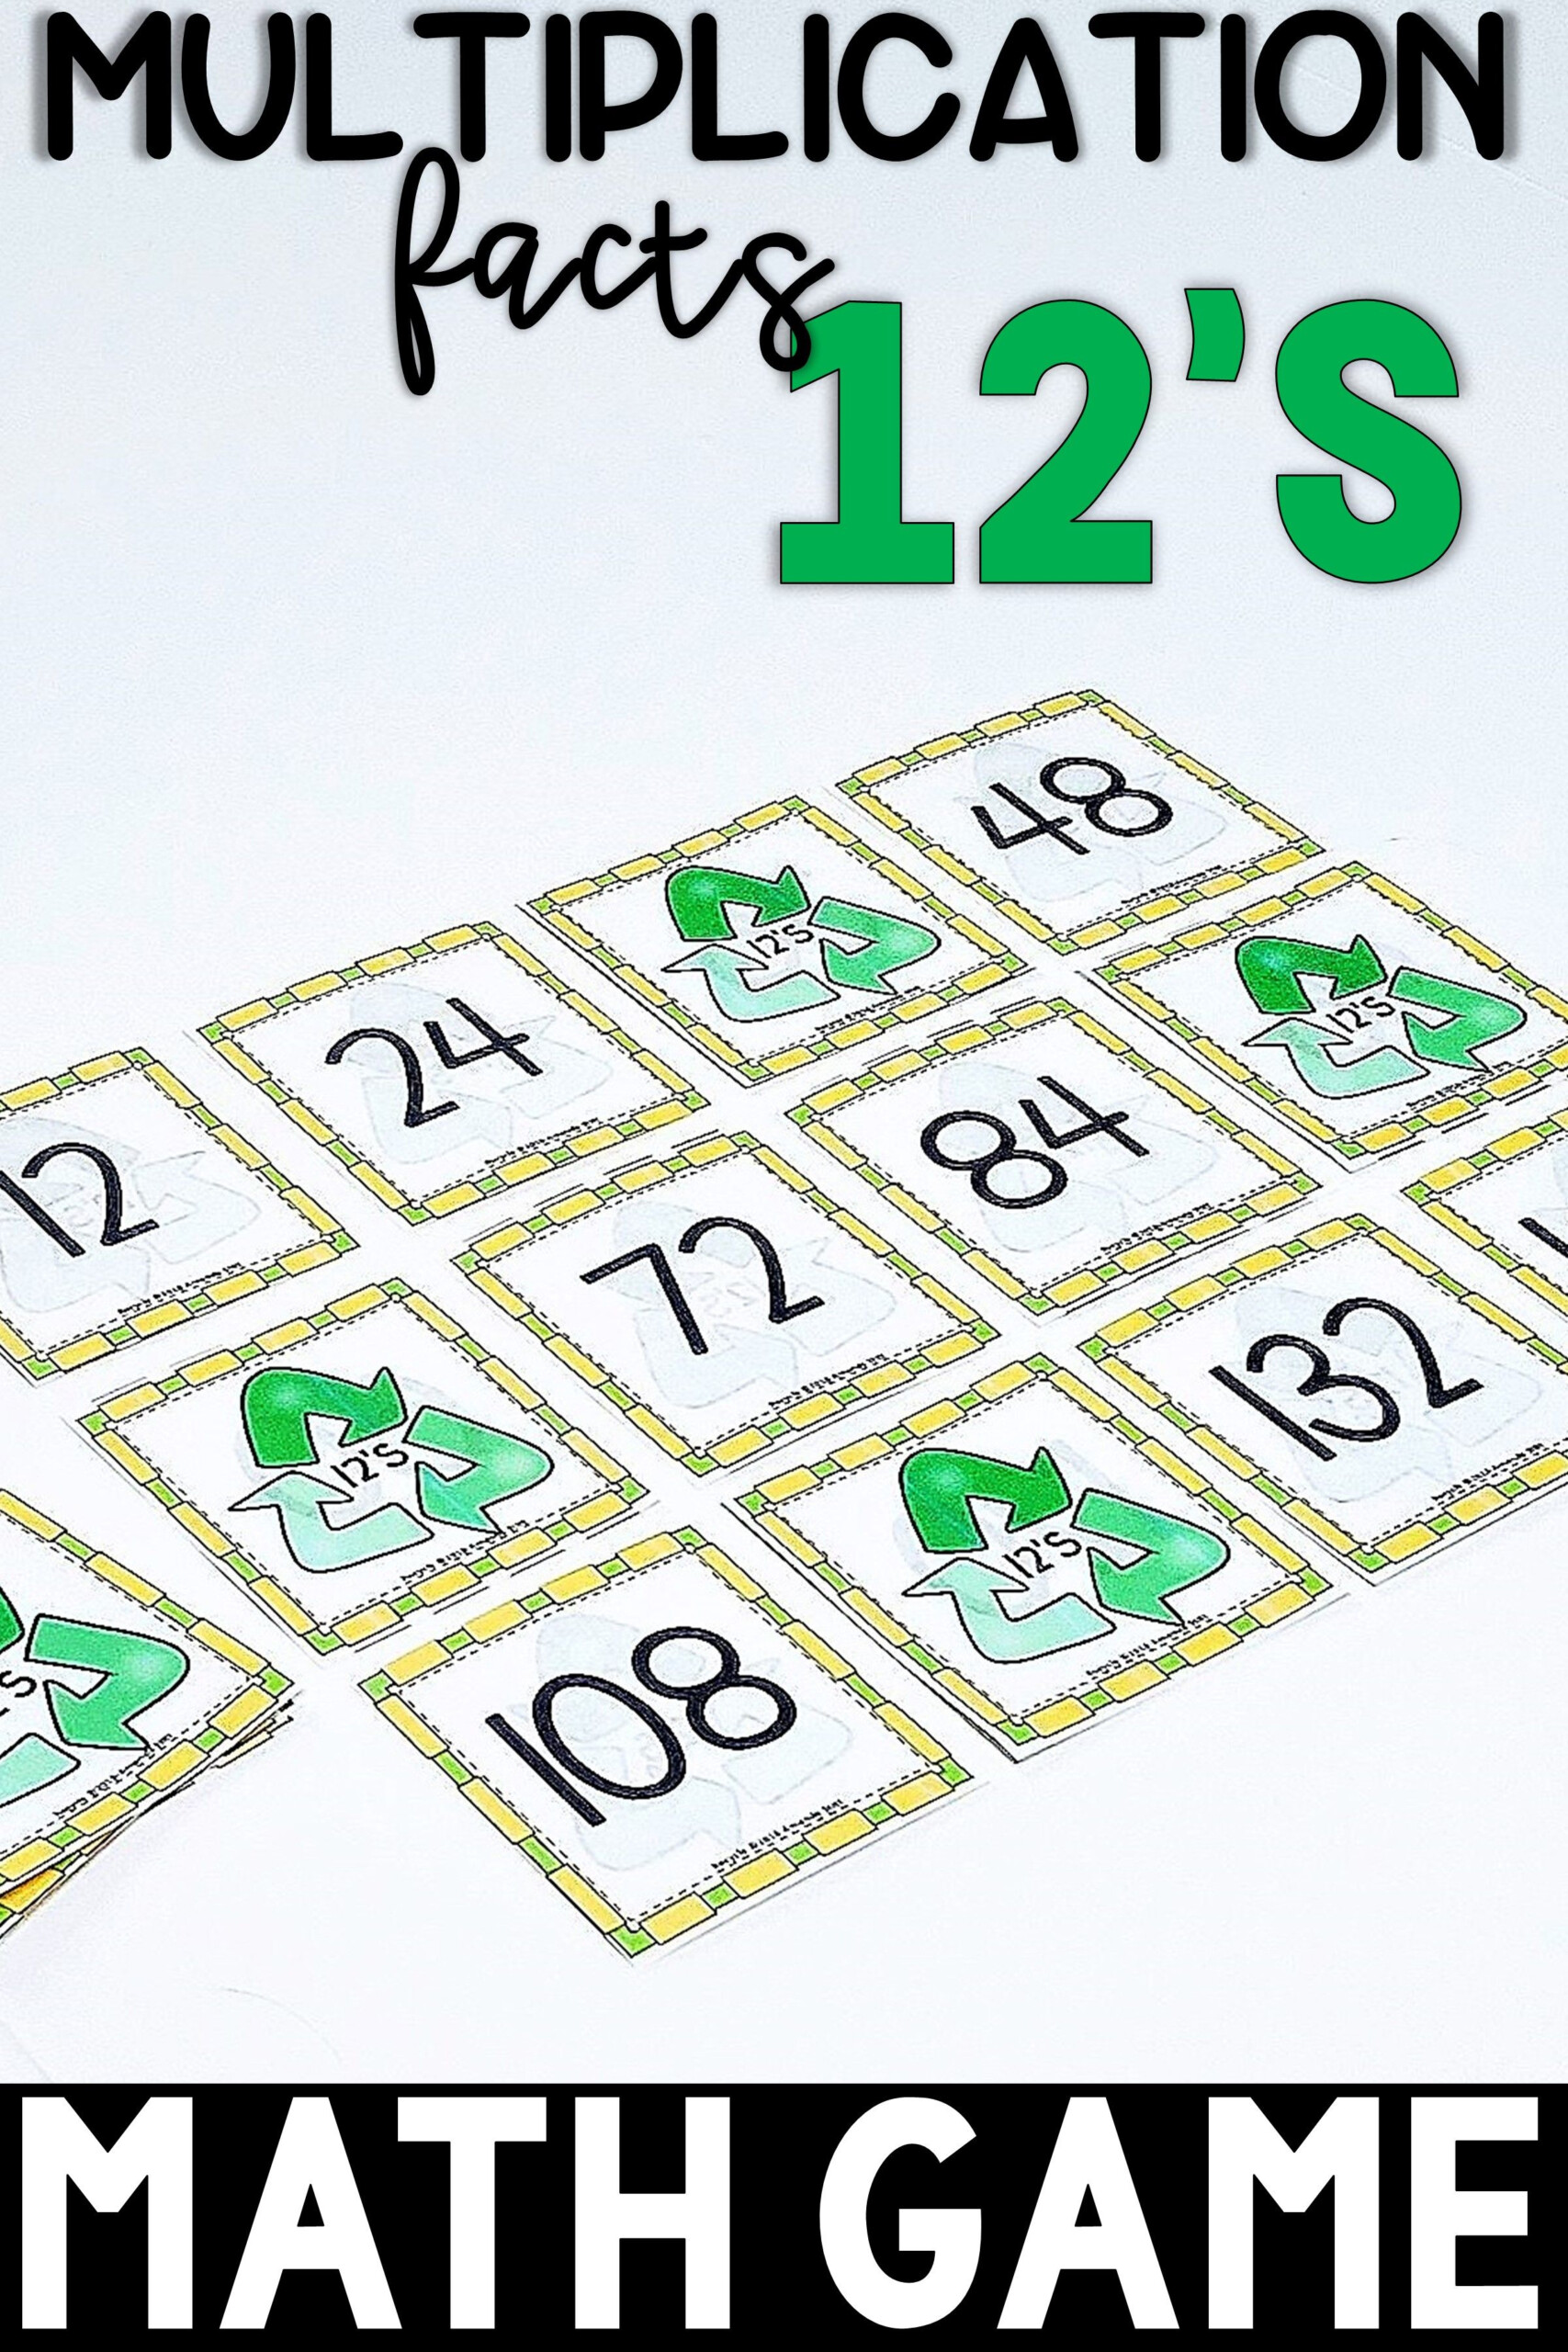 Skip Counting Game | Multiplication Facts Game | 12S